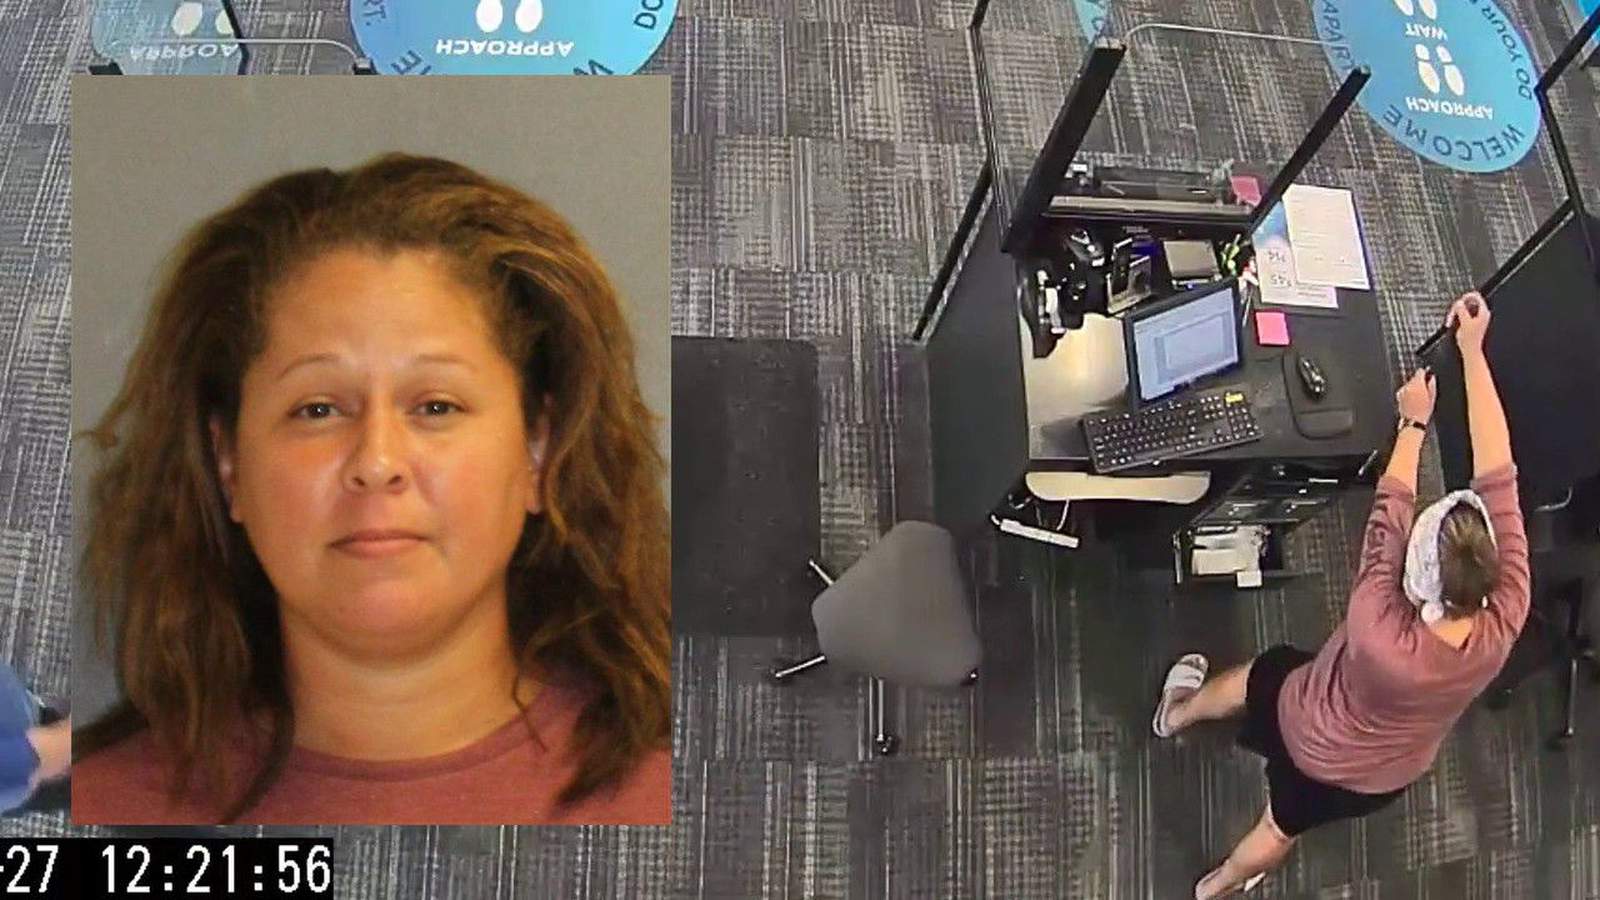 Video: Woman upset about refund uses crowbar to steal money from Spectrum store, police say